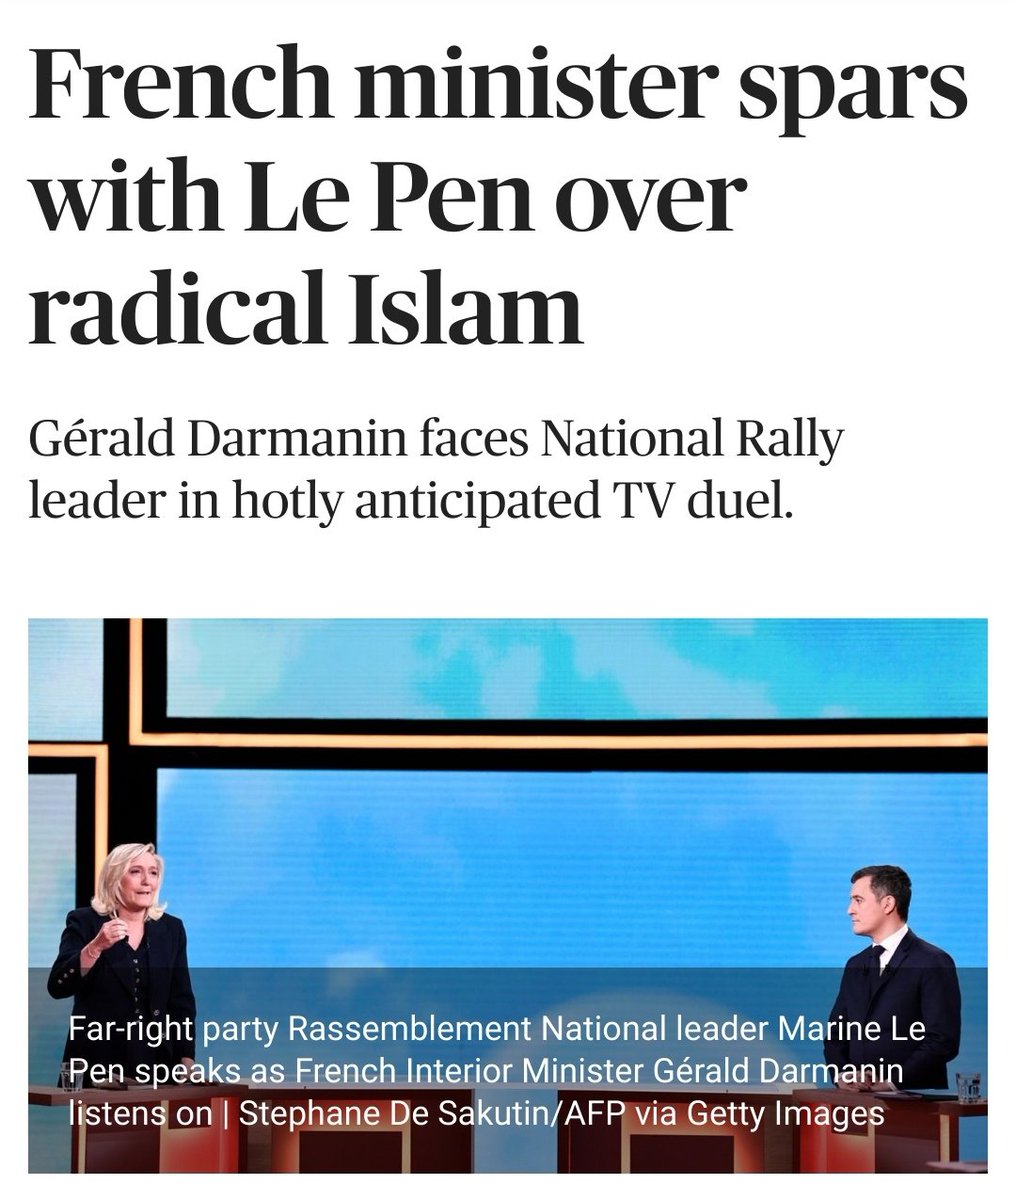  The same week he told Marine Le Pen she isn't tough enough against Islam, Darmanin, the French Minister of the Interior, ordered the dissolution of the extreme right Génération identitaireThis is not a contradiction, but the interplay between liberal and illiberal racisms 1/